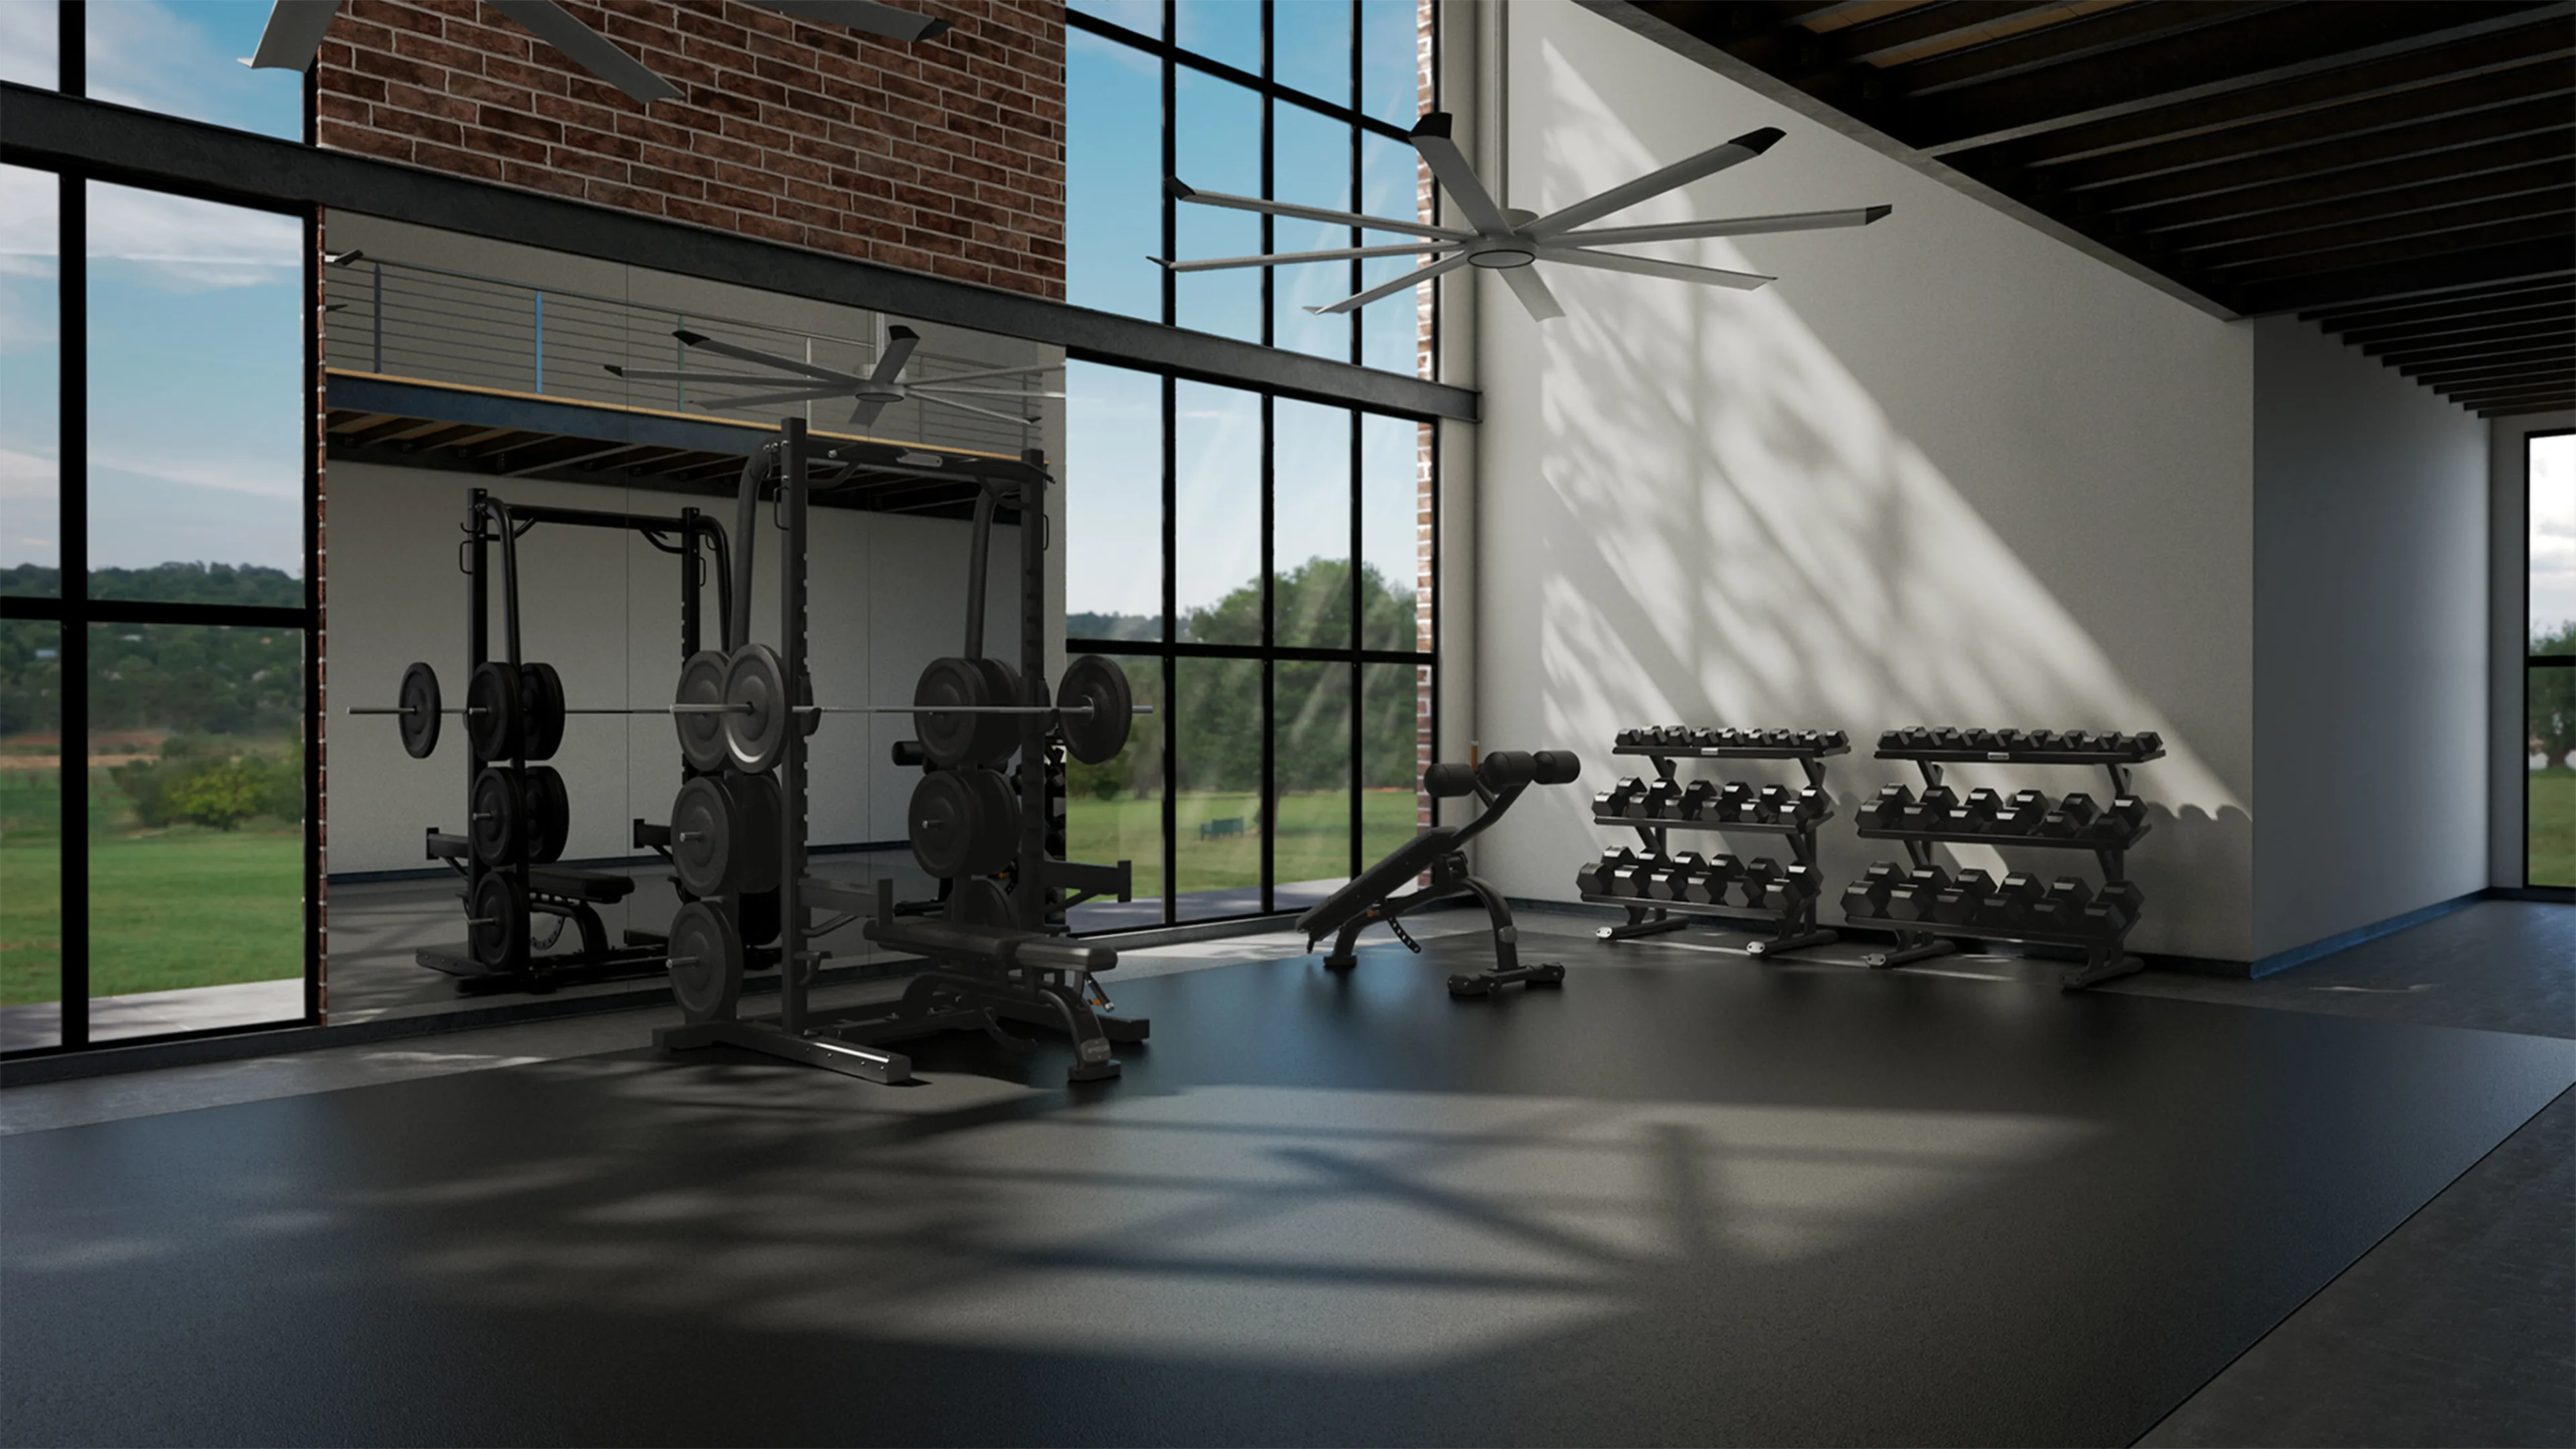 Precor benches and racks in a gym setting